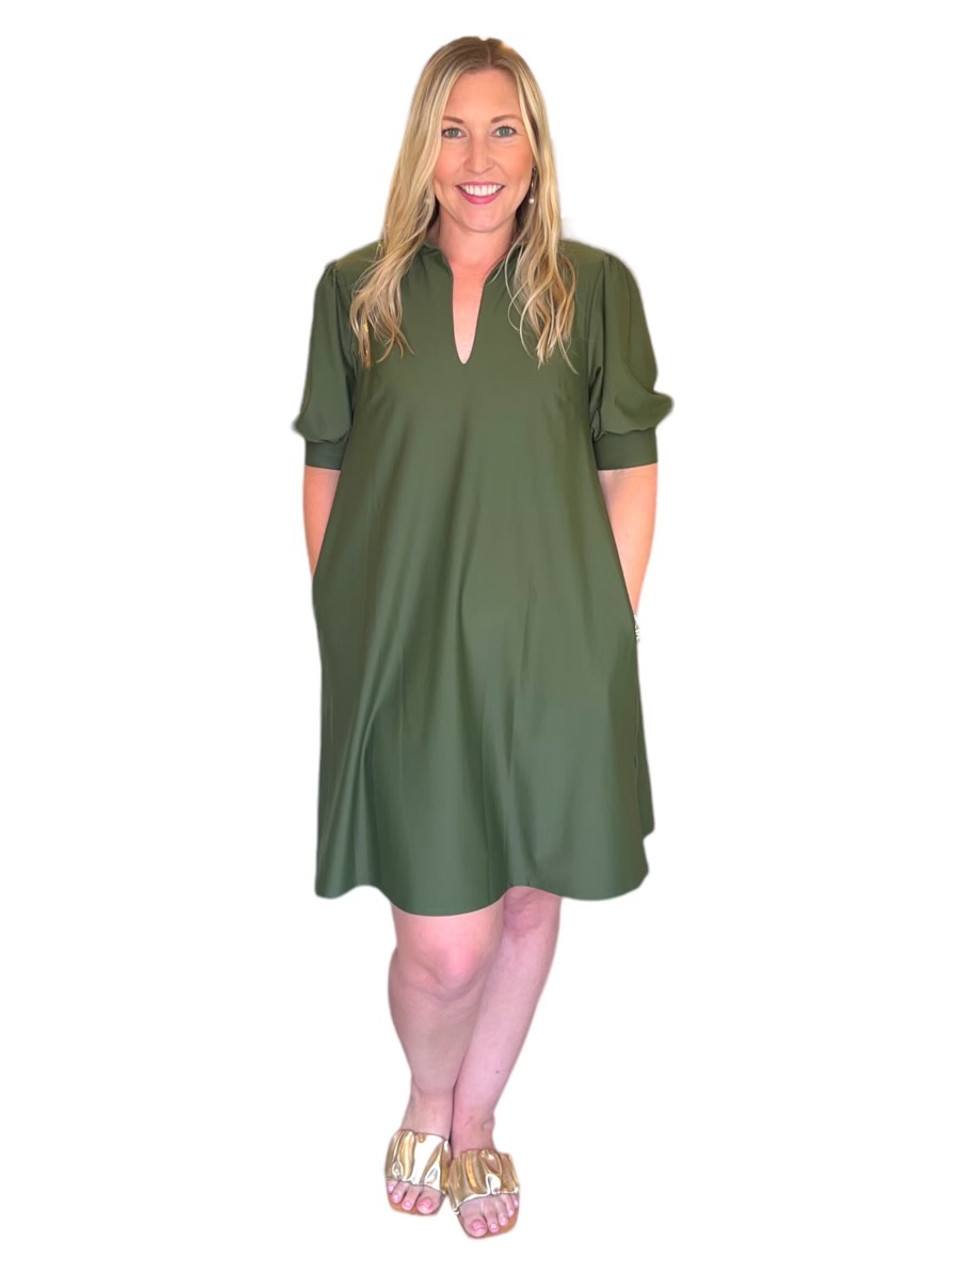 Jude Connally Emerson Dress, Loden - Monkee's of the Village